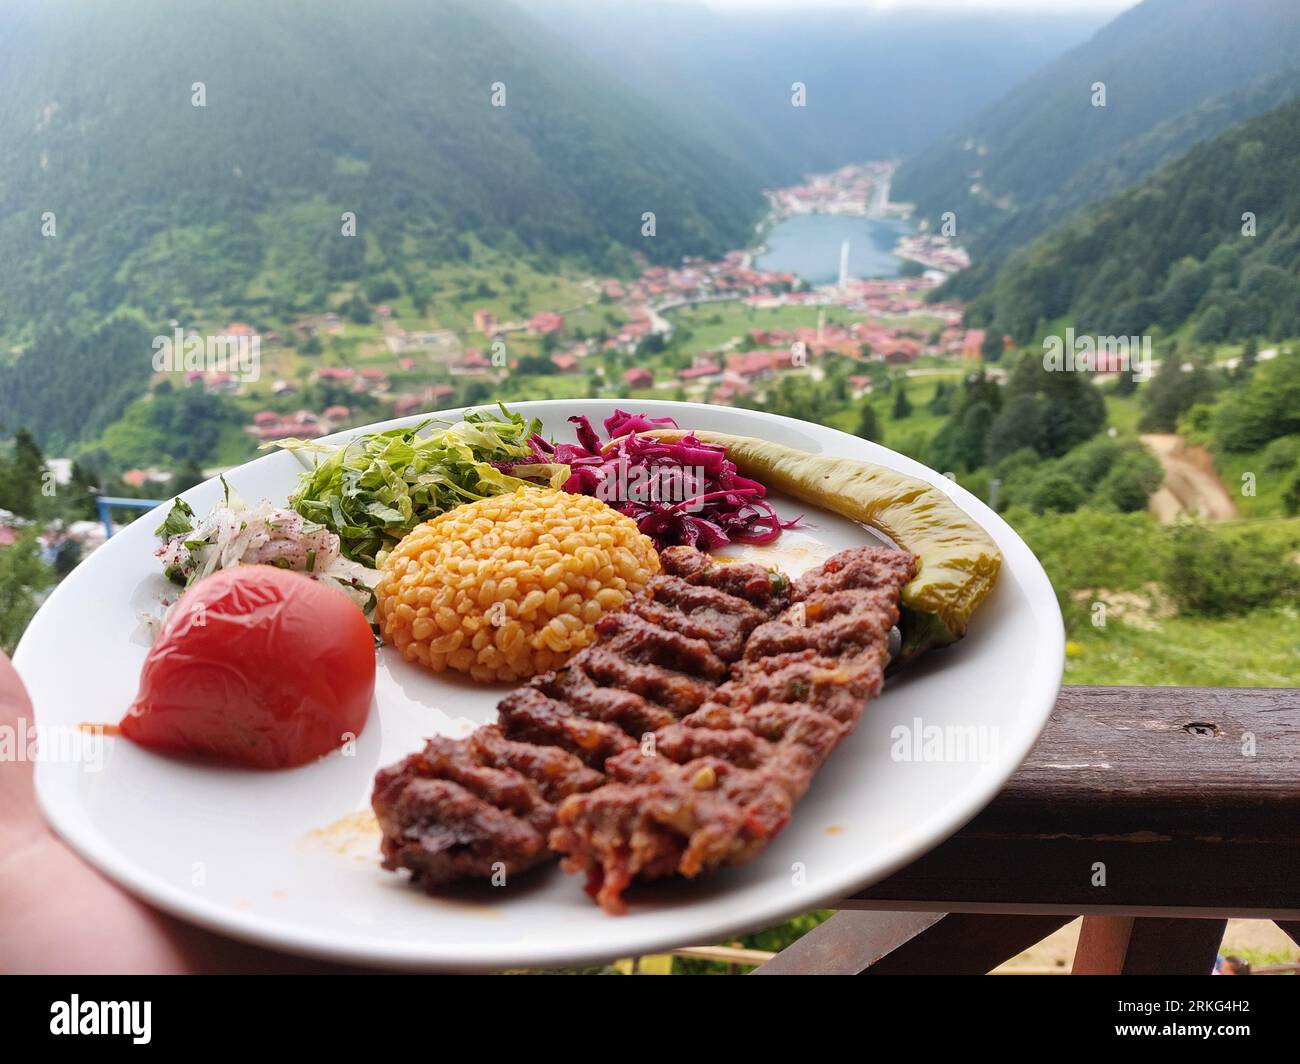 A white plate with a variety of cooked meats and vegetables is featured in the foreground of a vibrant green hillside Stock Photo